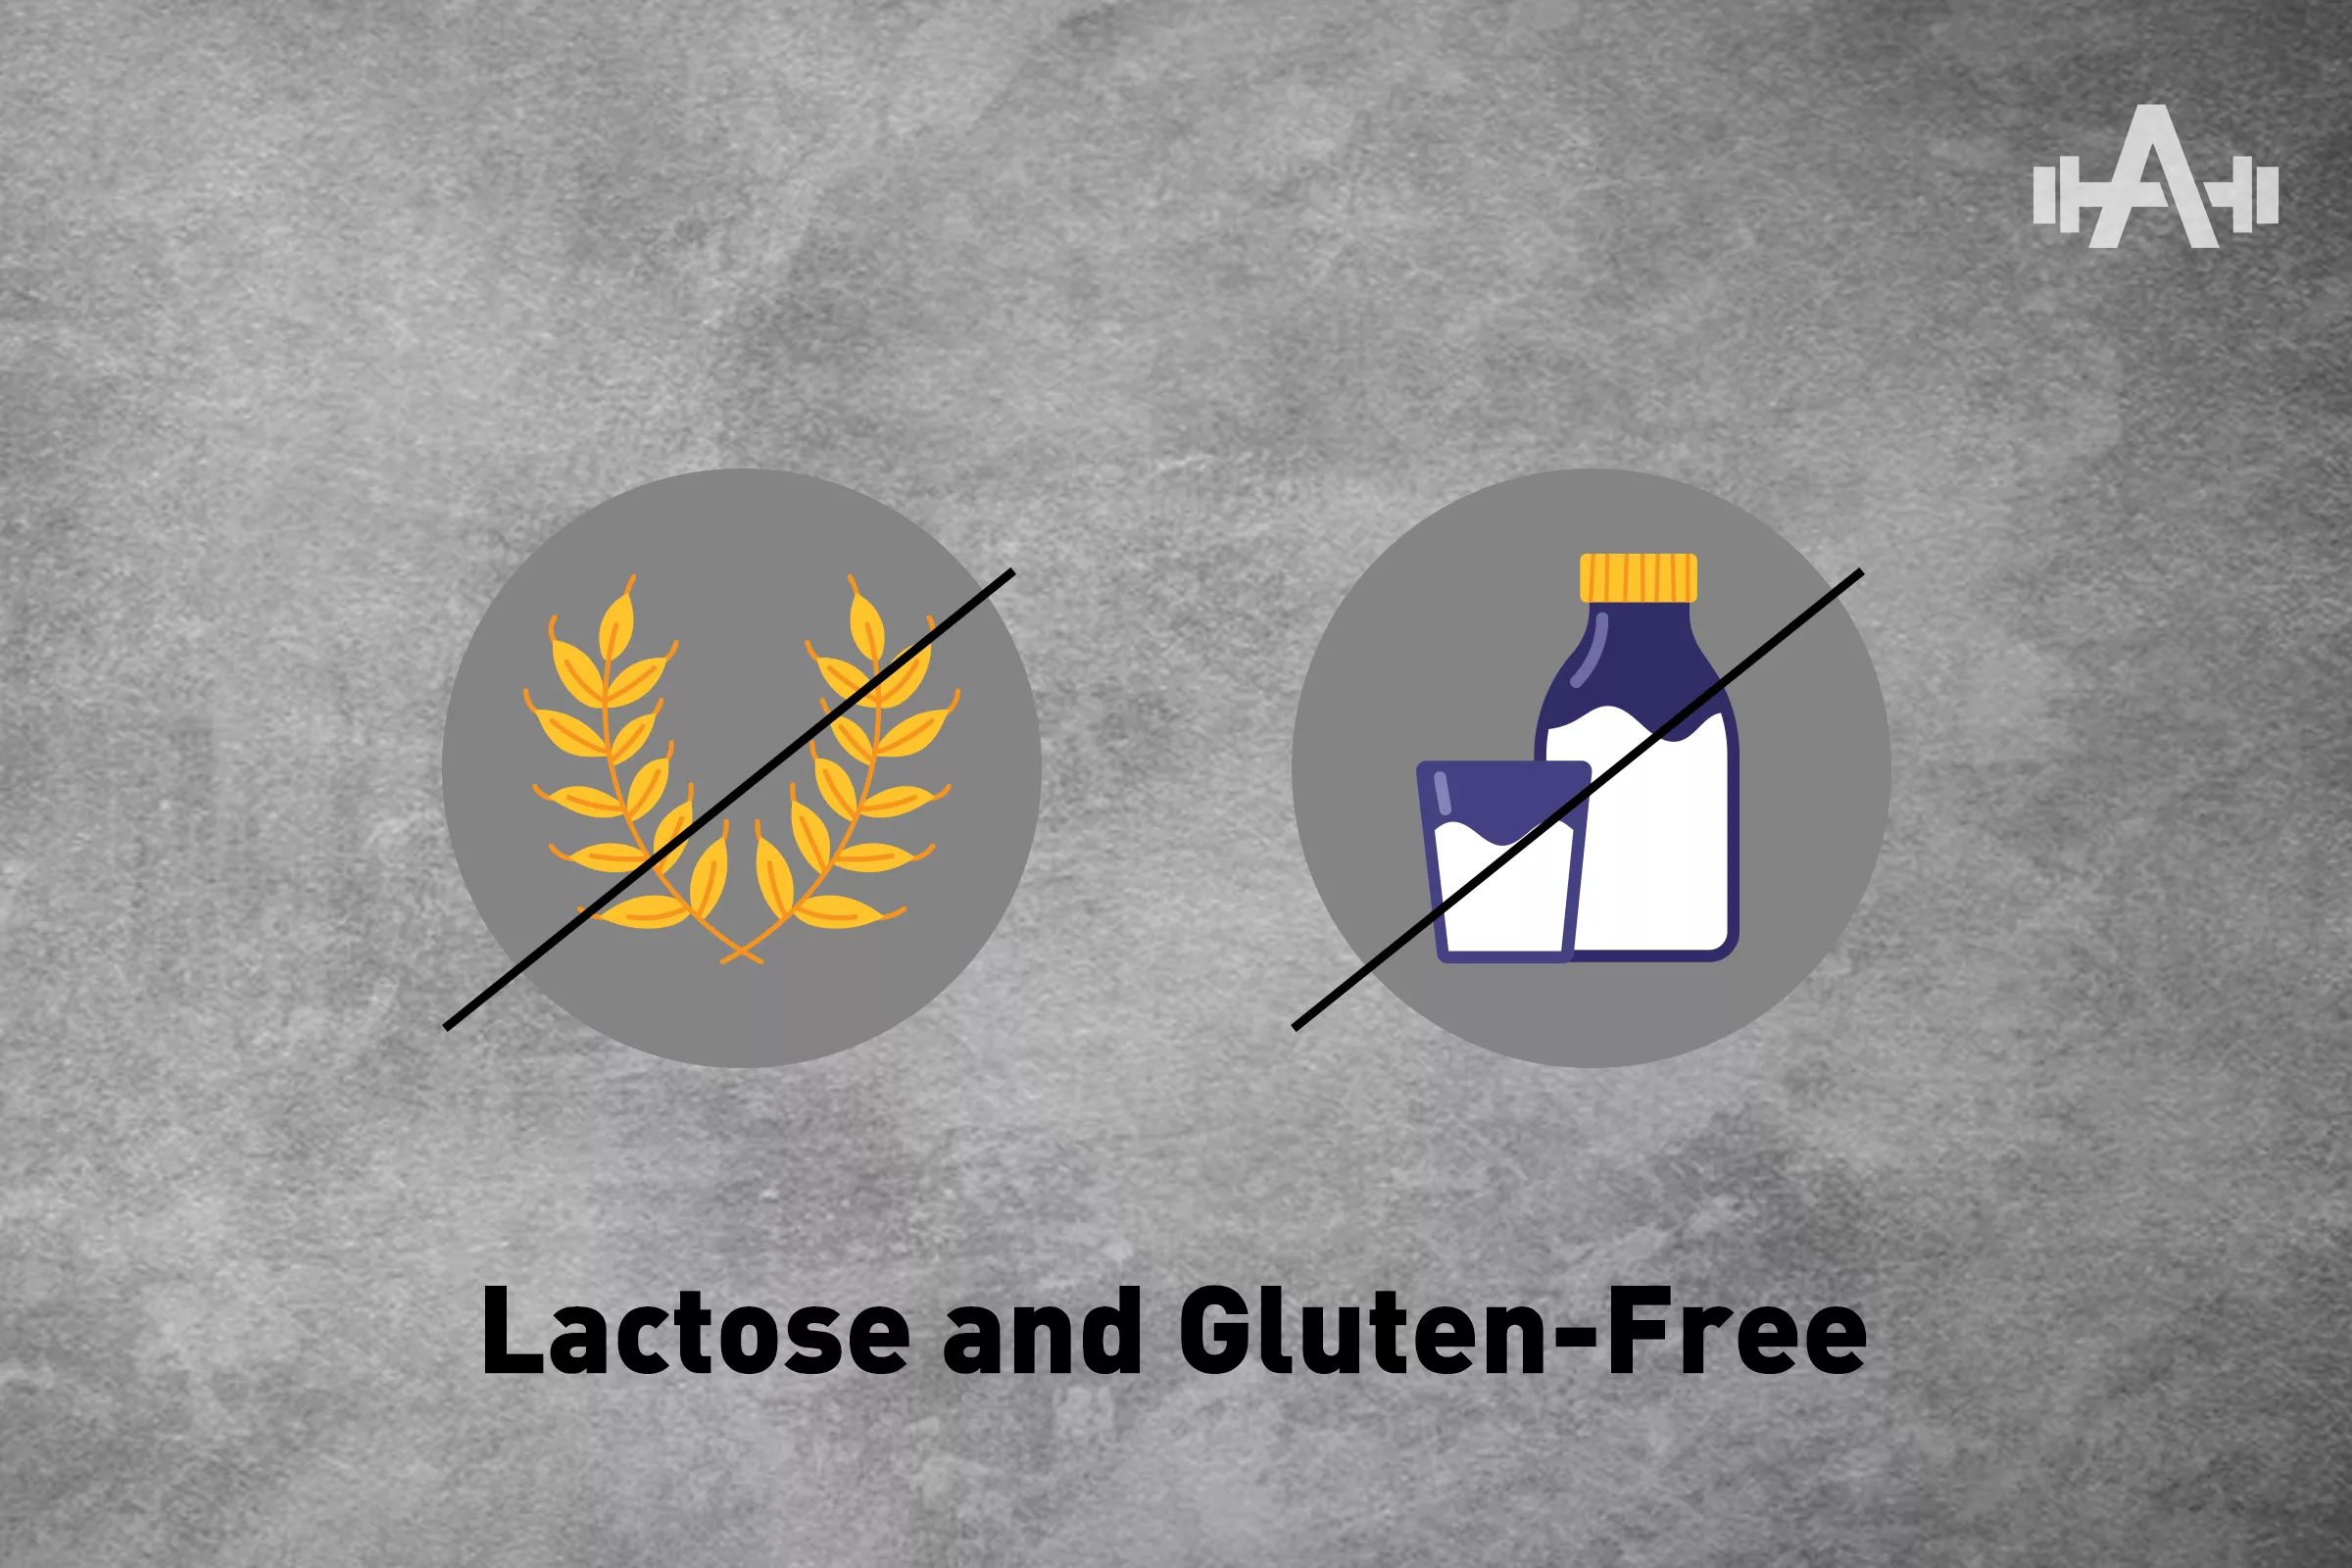 Lactose and Gluten-Free